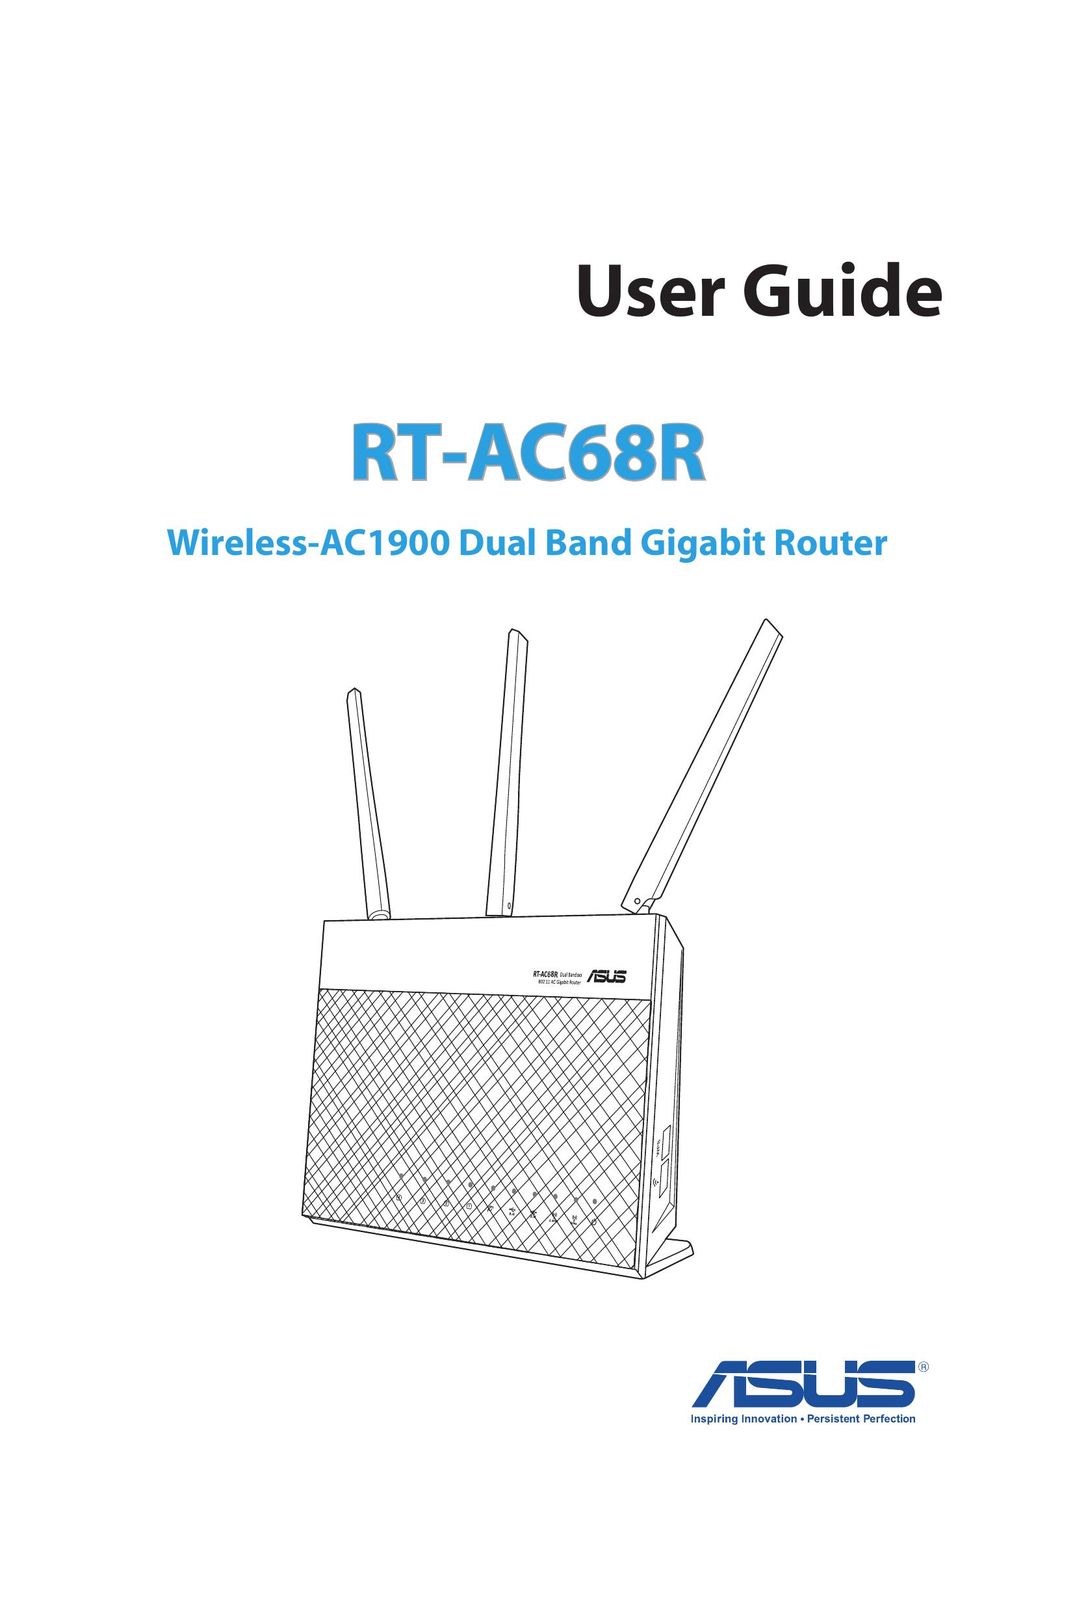 Asus RT-AC68R Network Router User Manual